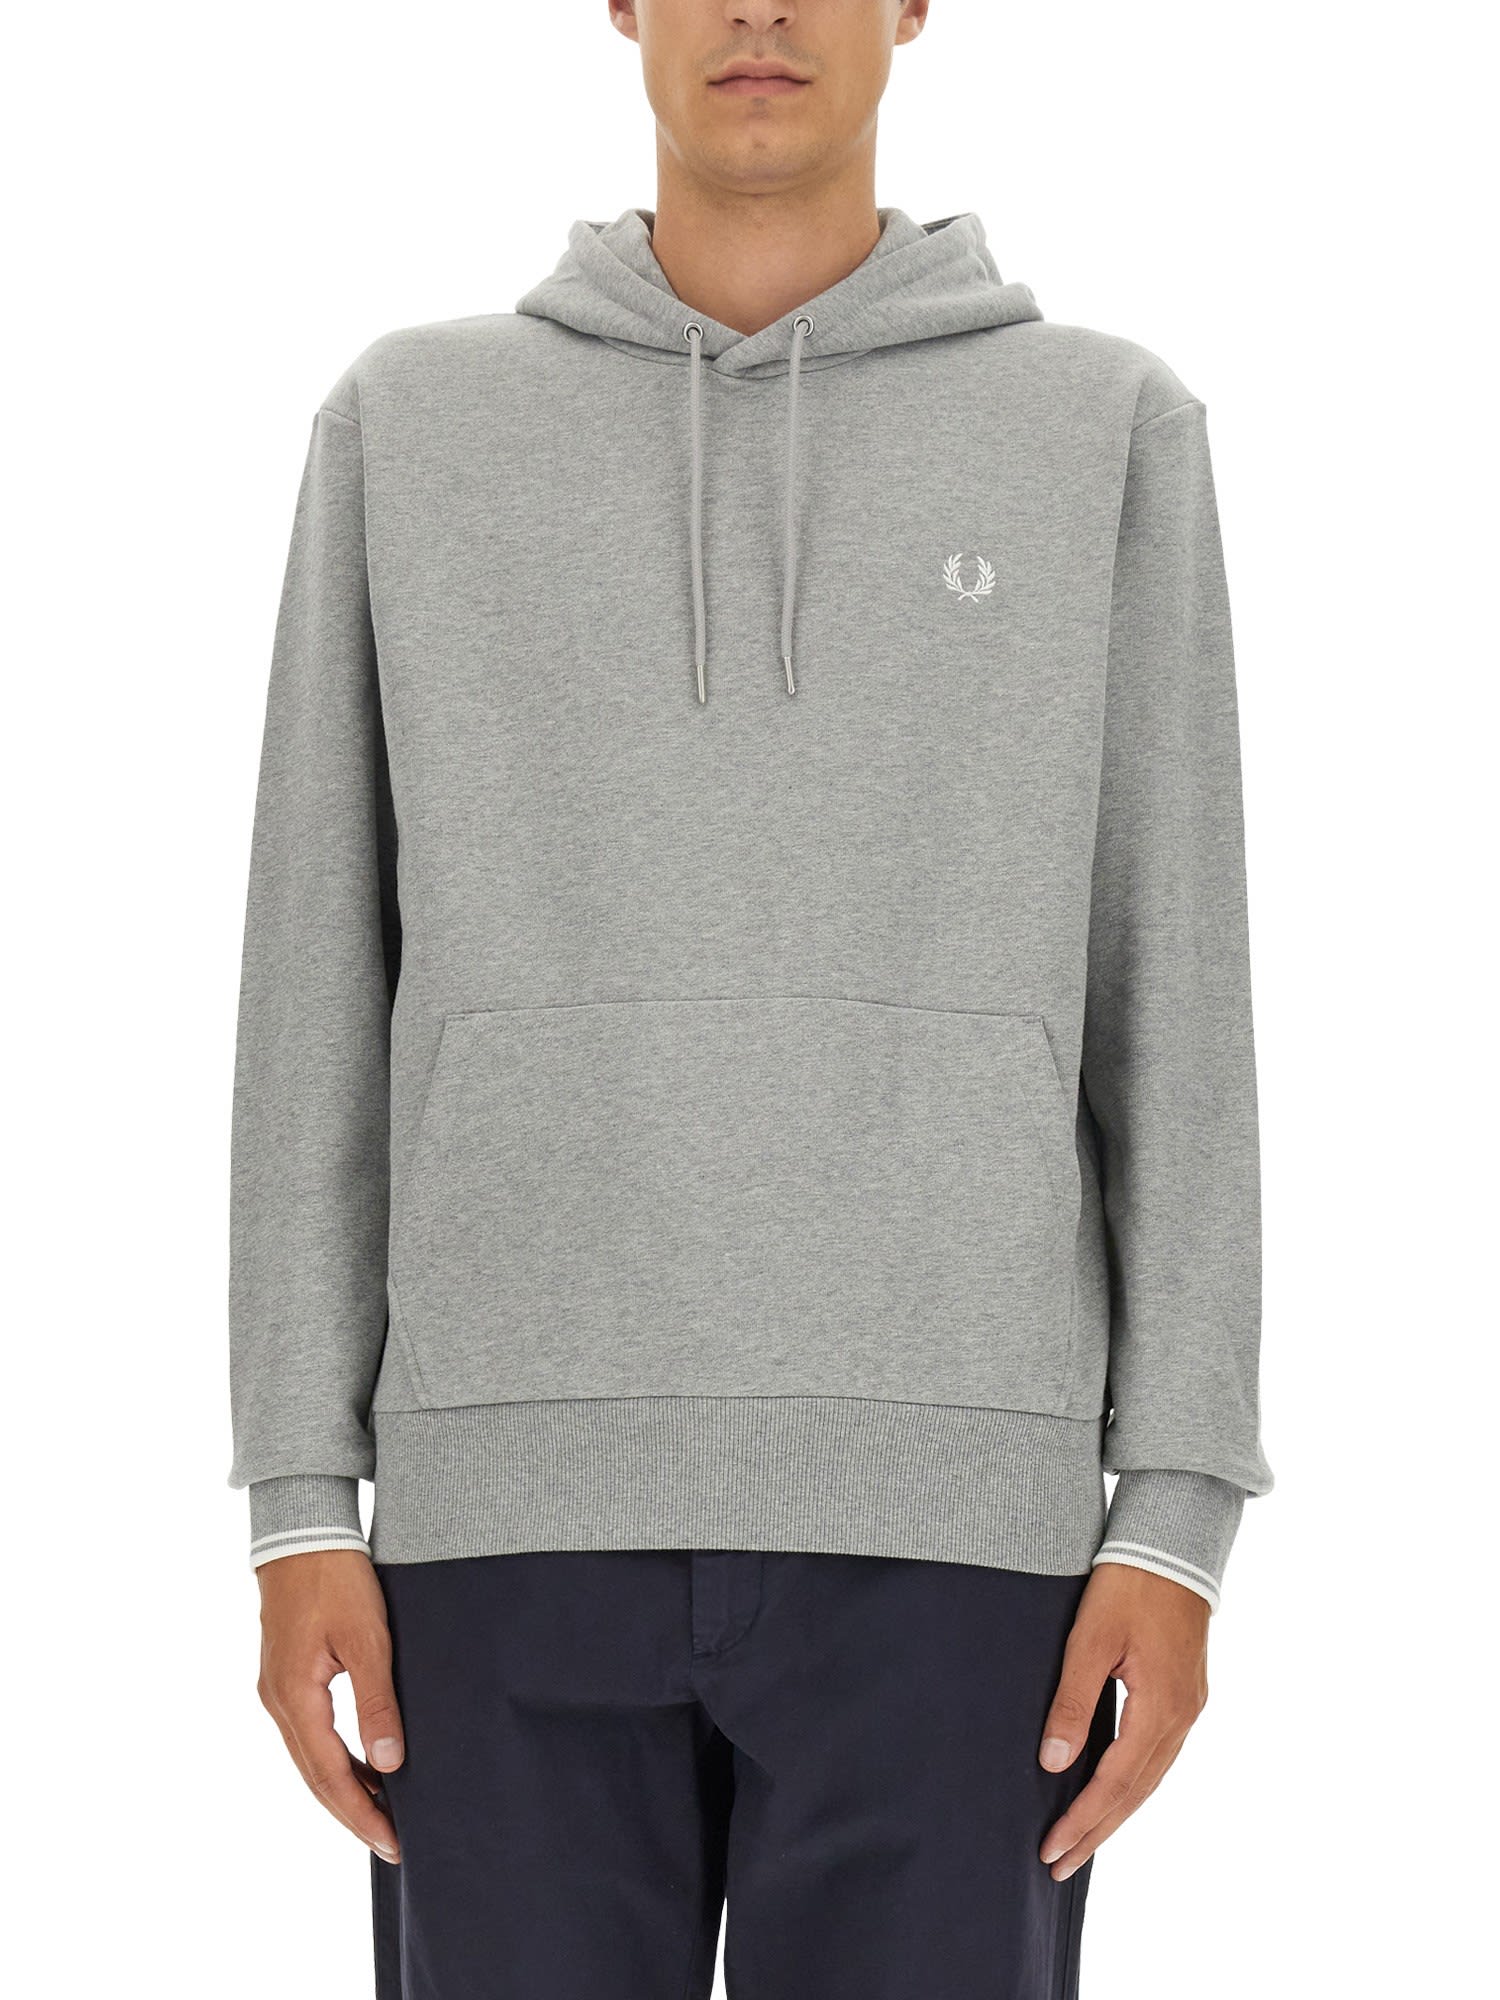 FRED PERRY HOODIE